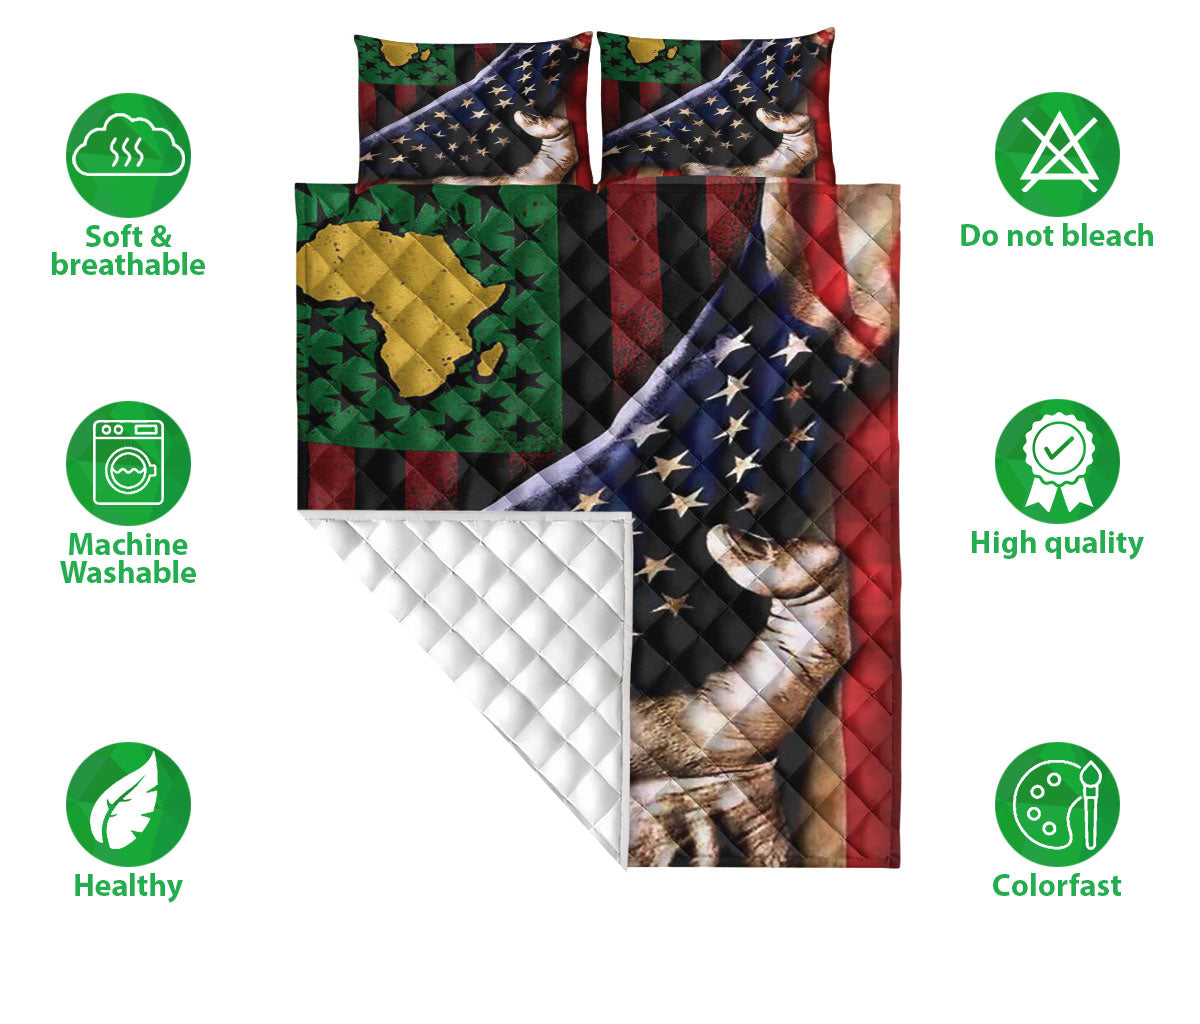 Ohaprints-Quilt-Bed-Set-Pillowcase-African-Map-Afro-American-Juneteenth-June-19Th-1865-Independence-Day-Freedom-Blanket-Bedspread-Bedding-2585-Double (70'' x 80'')